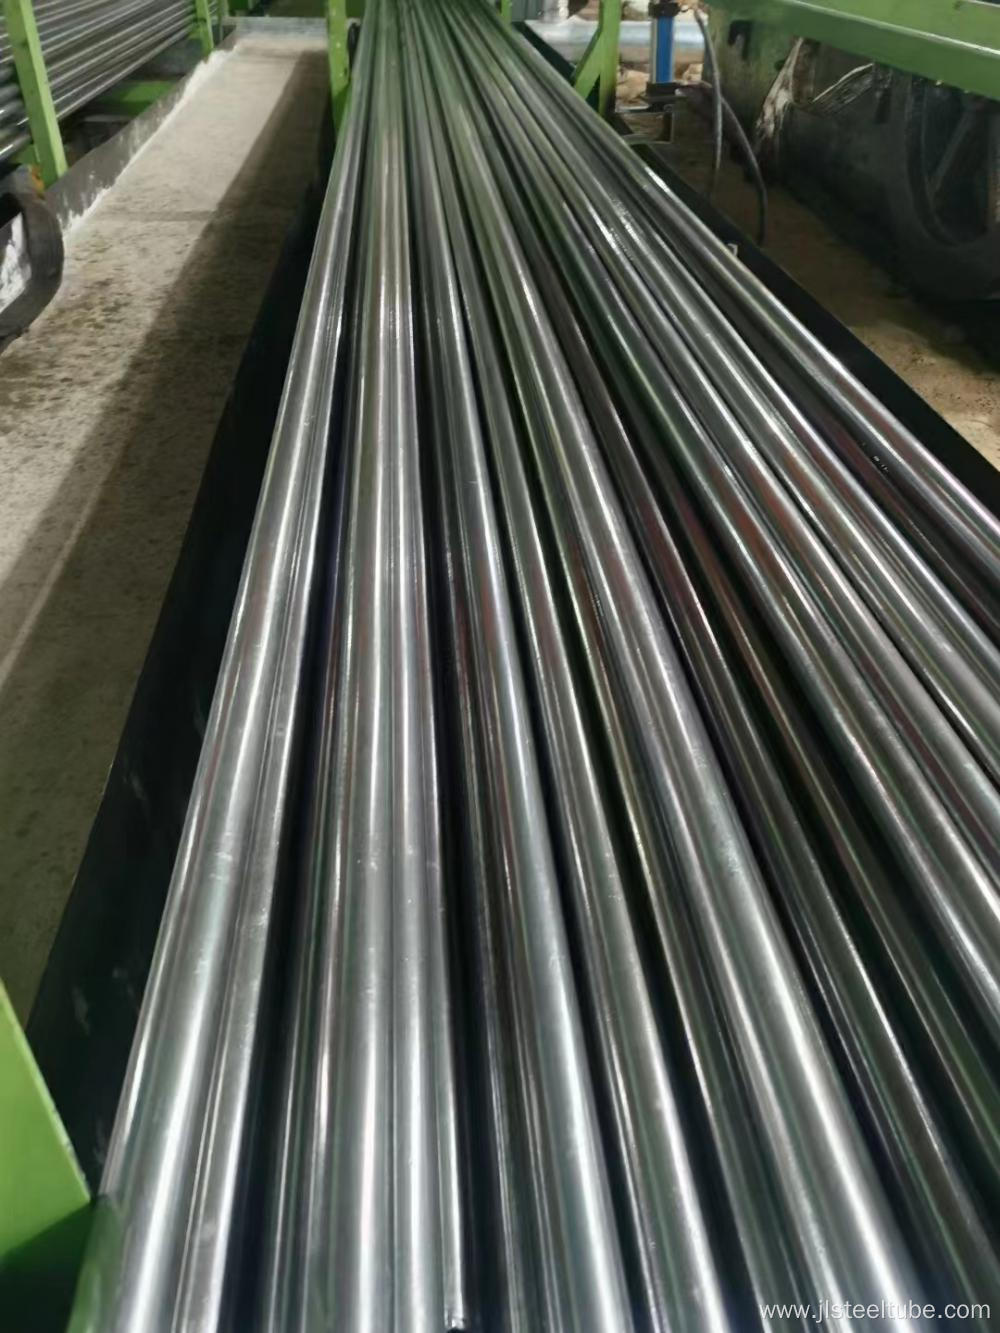 ASTM A312 seamless Stainless Steel Pipes